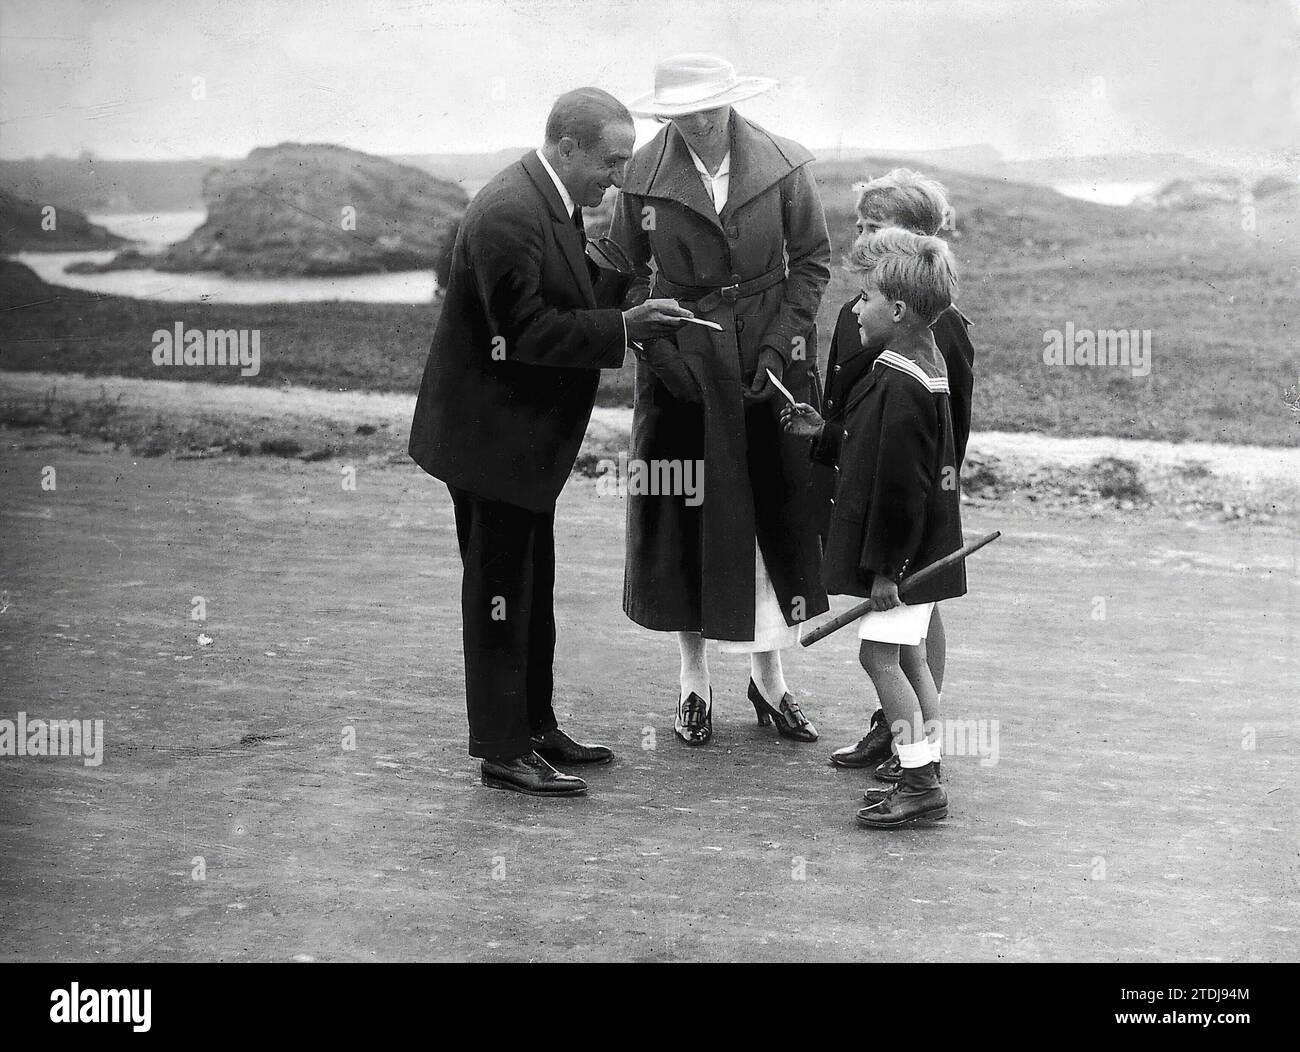 07/31/1921. Santander. The summer vacation of the royal family. Their Highnesses the Infants D. Juan and D. Gonzalo Speaking with Our 'Reporter' Photographer Julio Duque. Credit: Album / Archivo ABC / Julio Duque Stock Photo